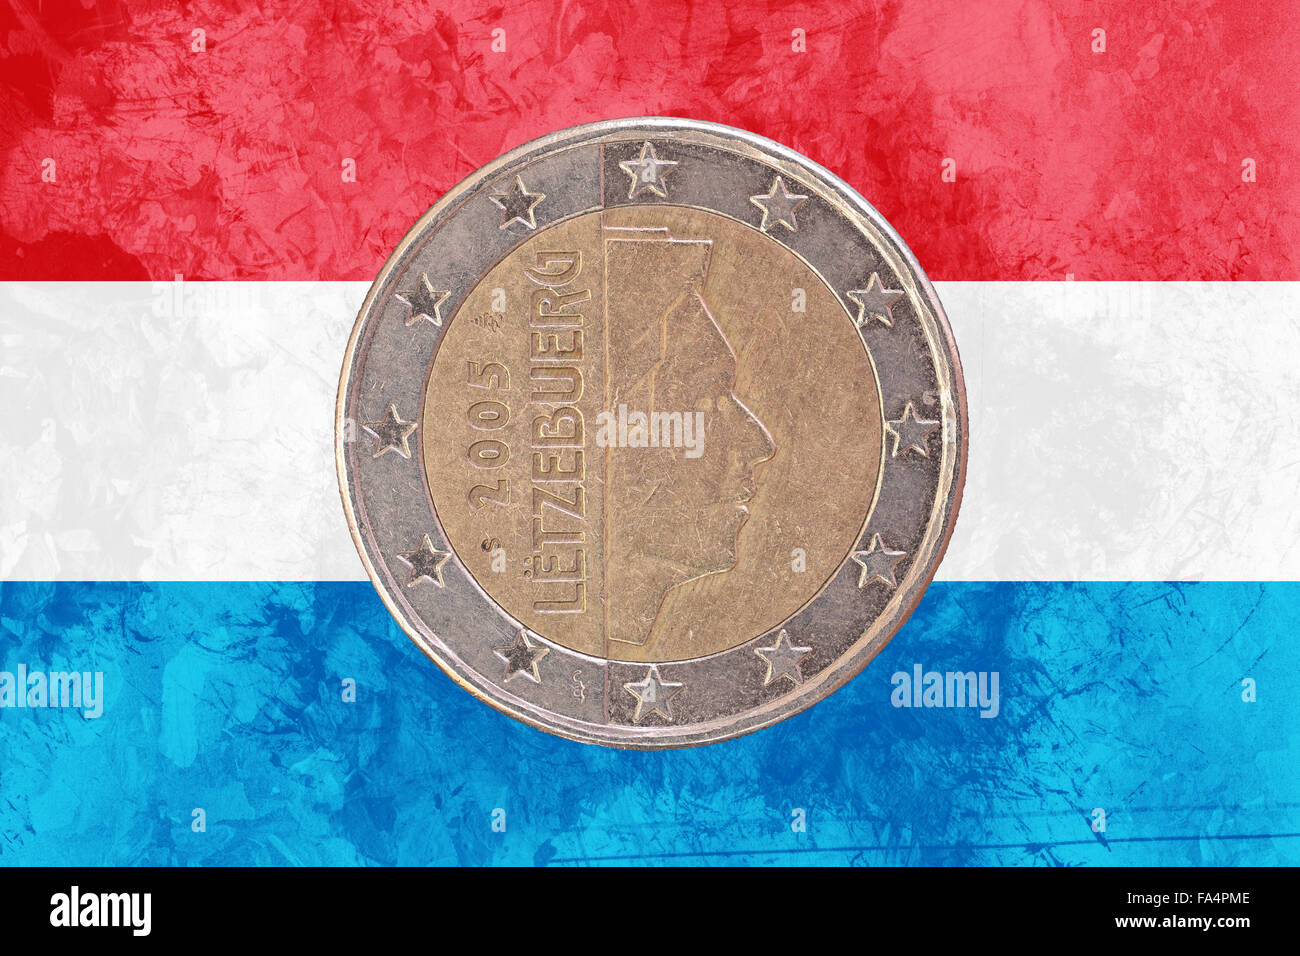 Two euros coin from Luxembourg isolated on the national luxembourgish flag as background Stock Photo